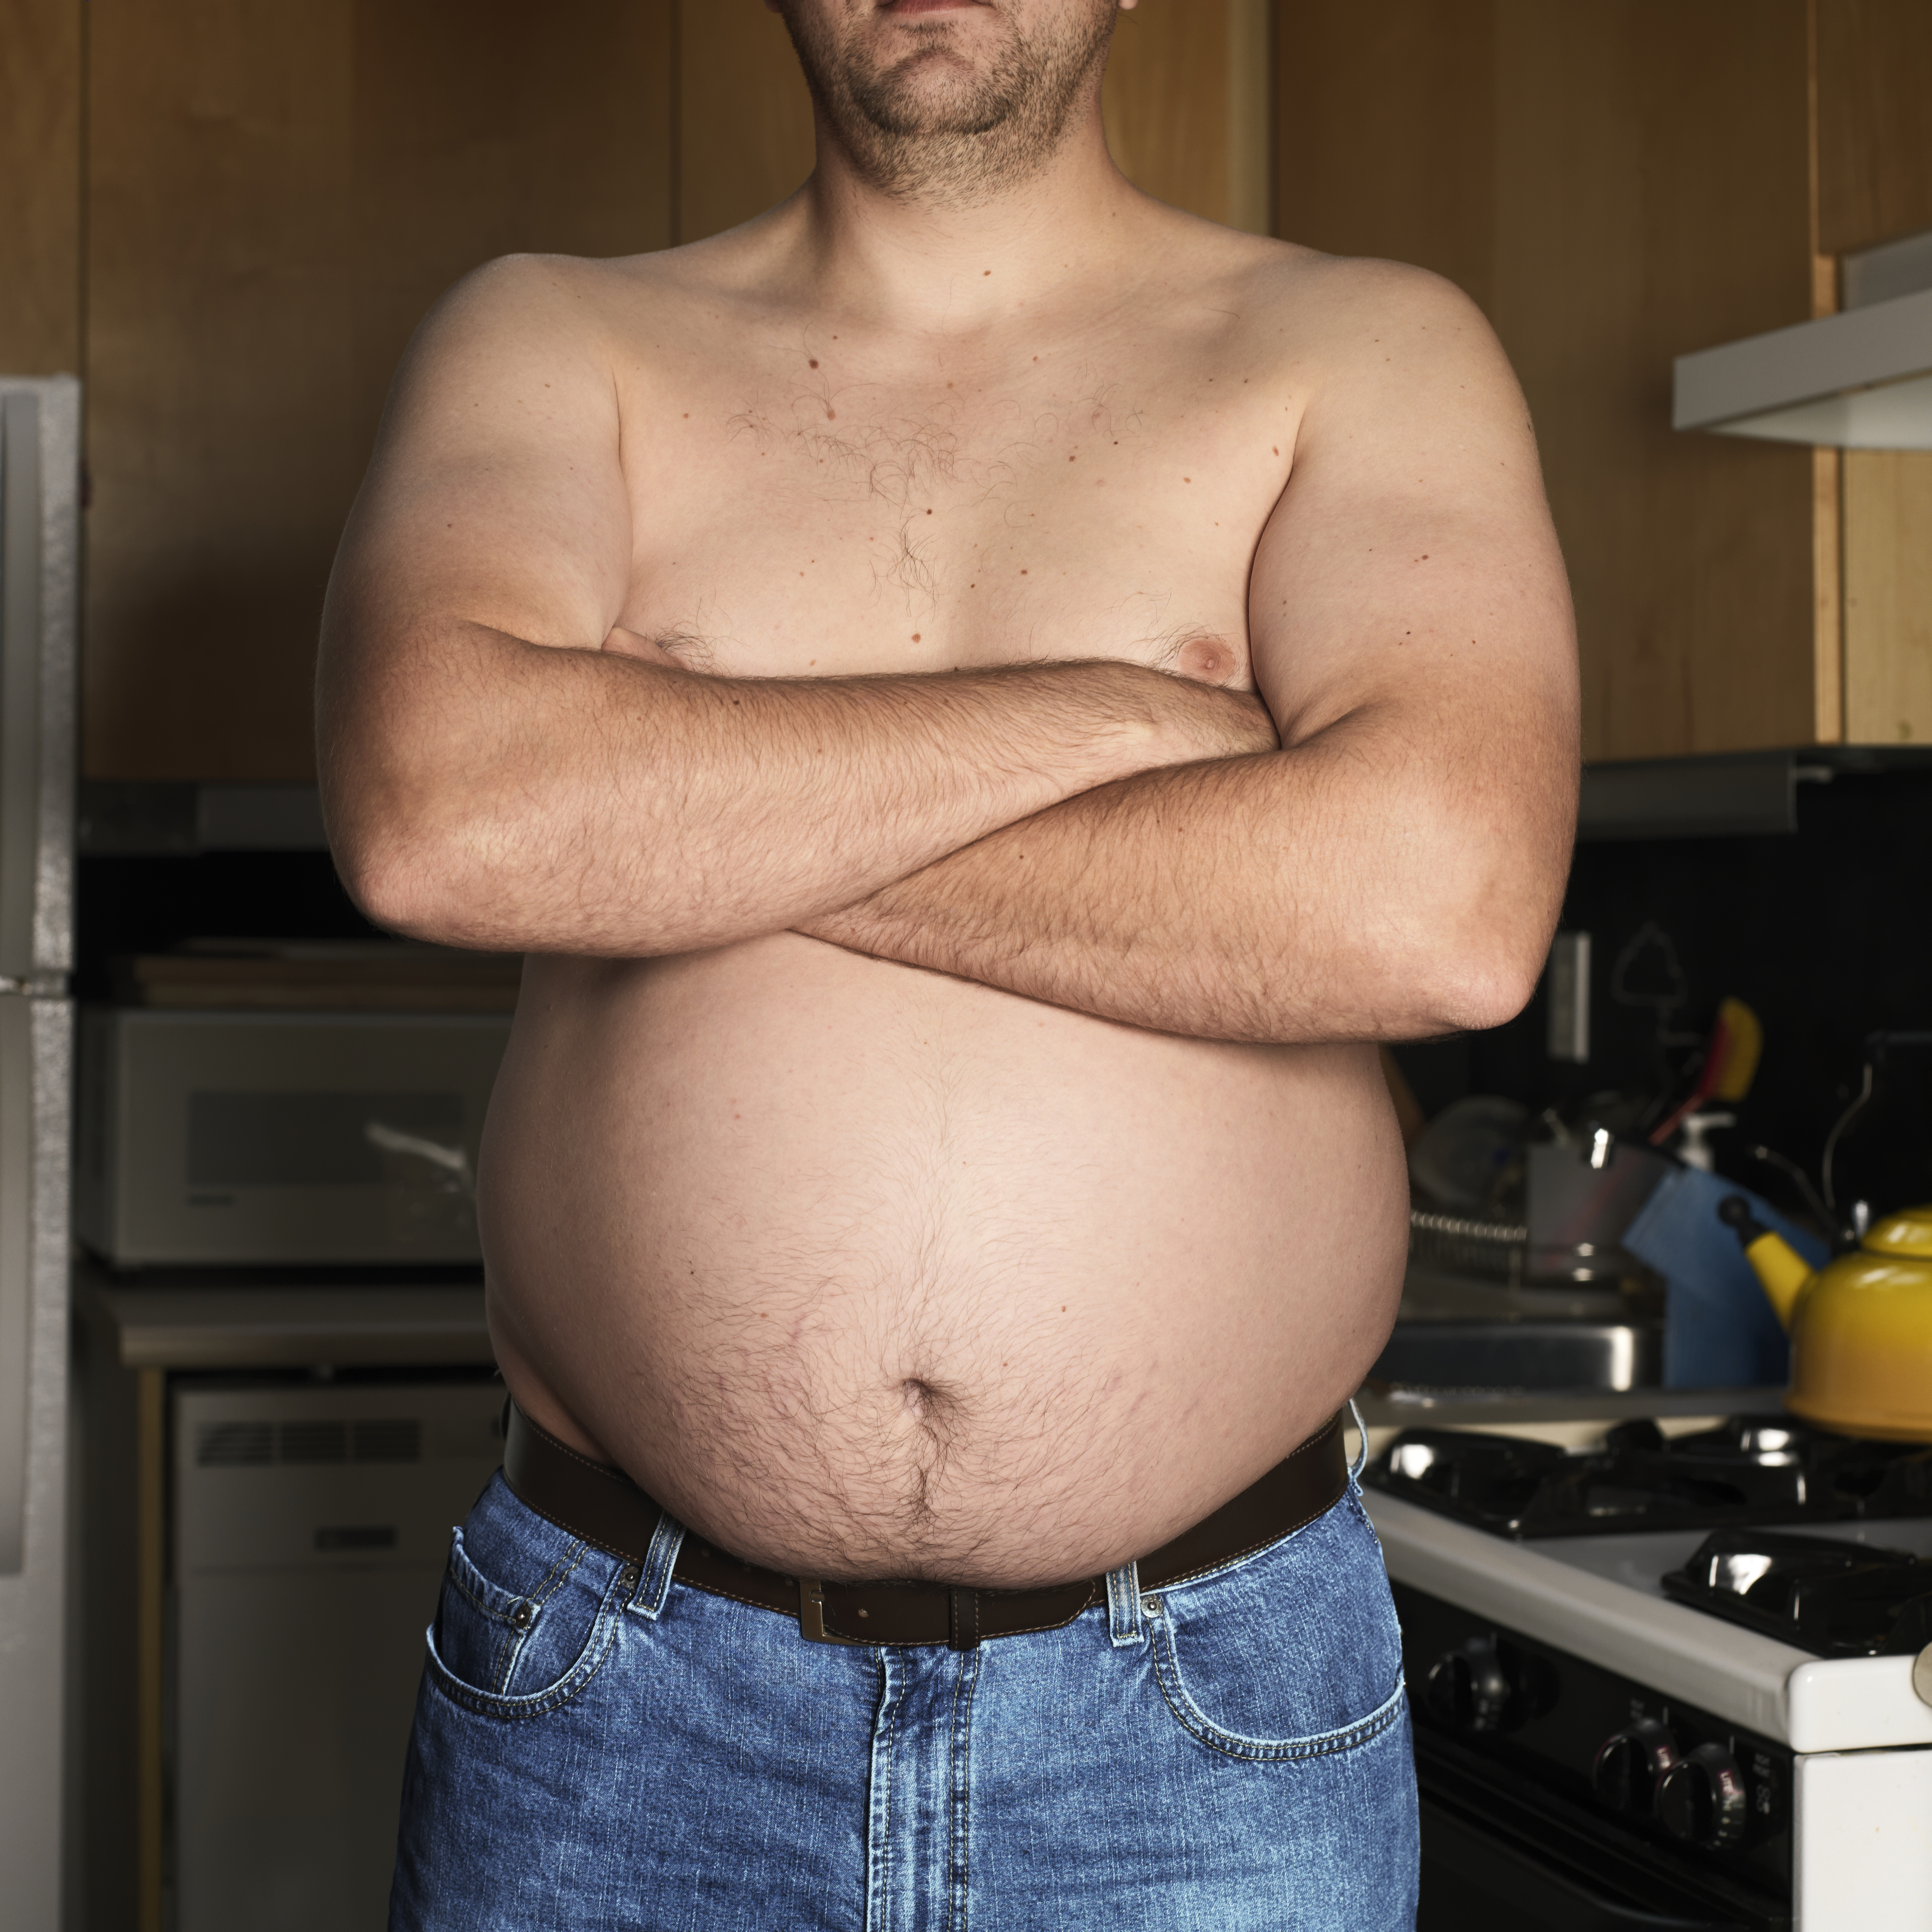 Shirtless man standing in  kitchen with arms crossed, mid section, close-up